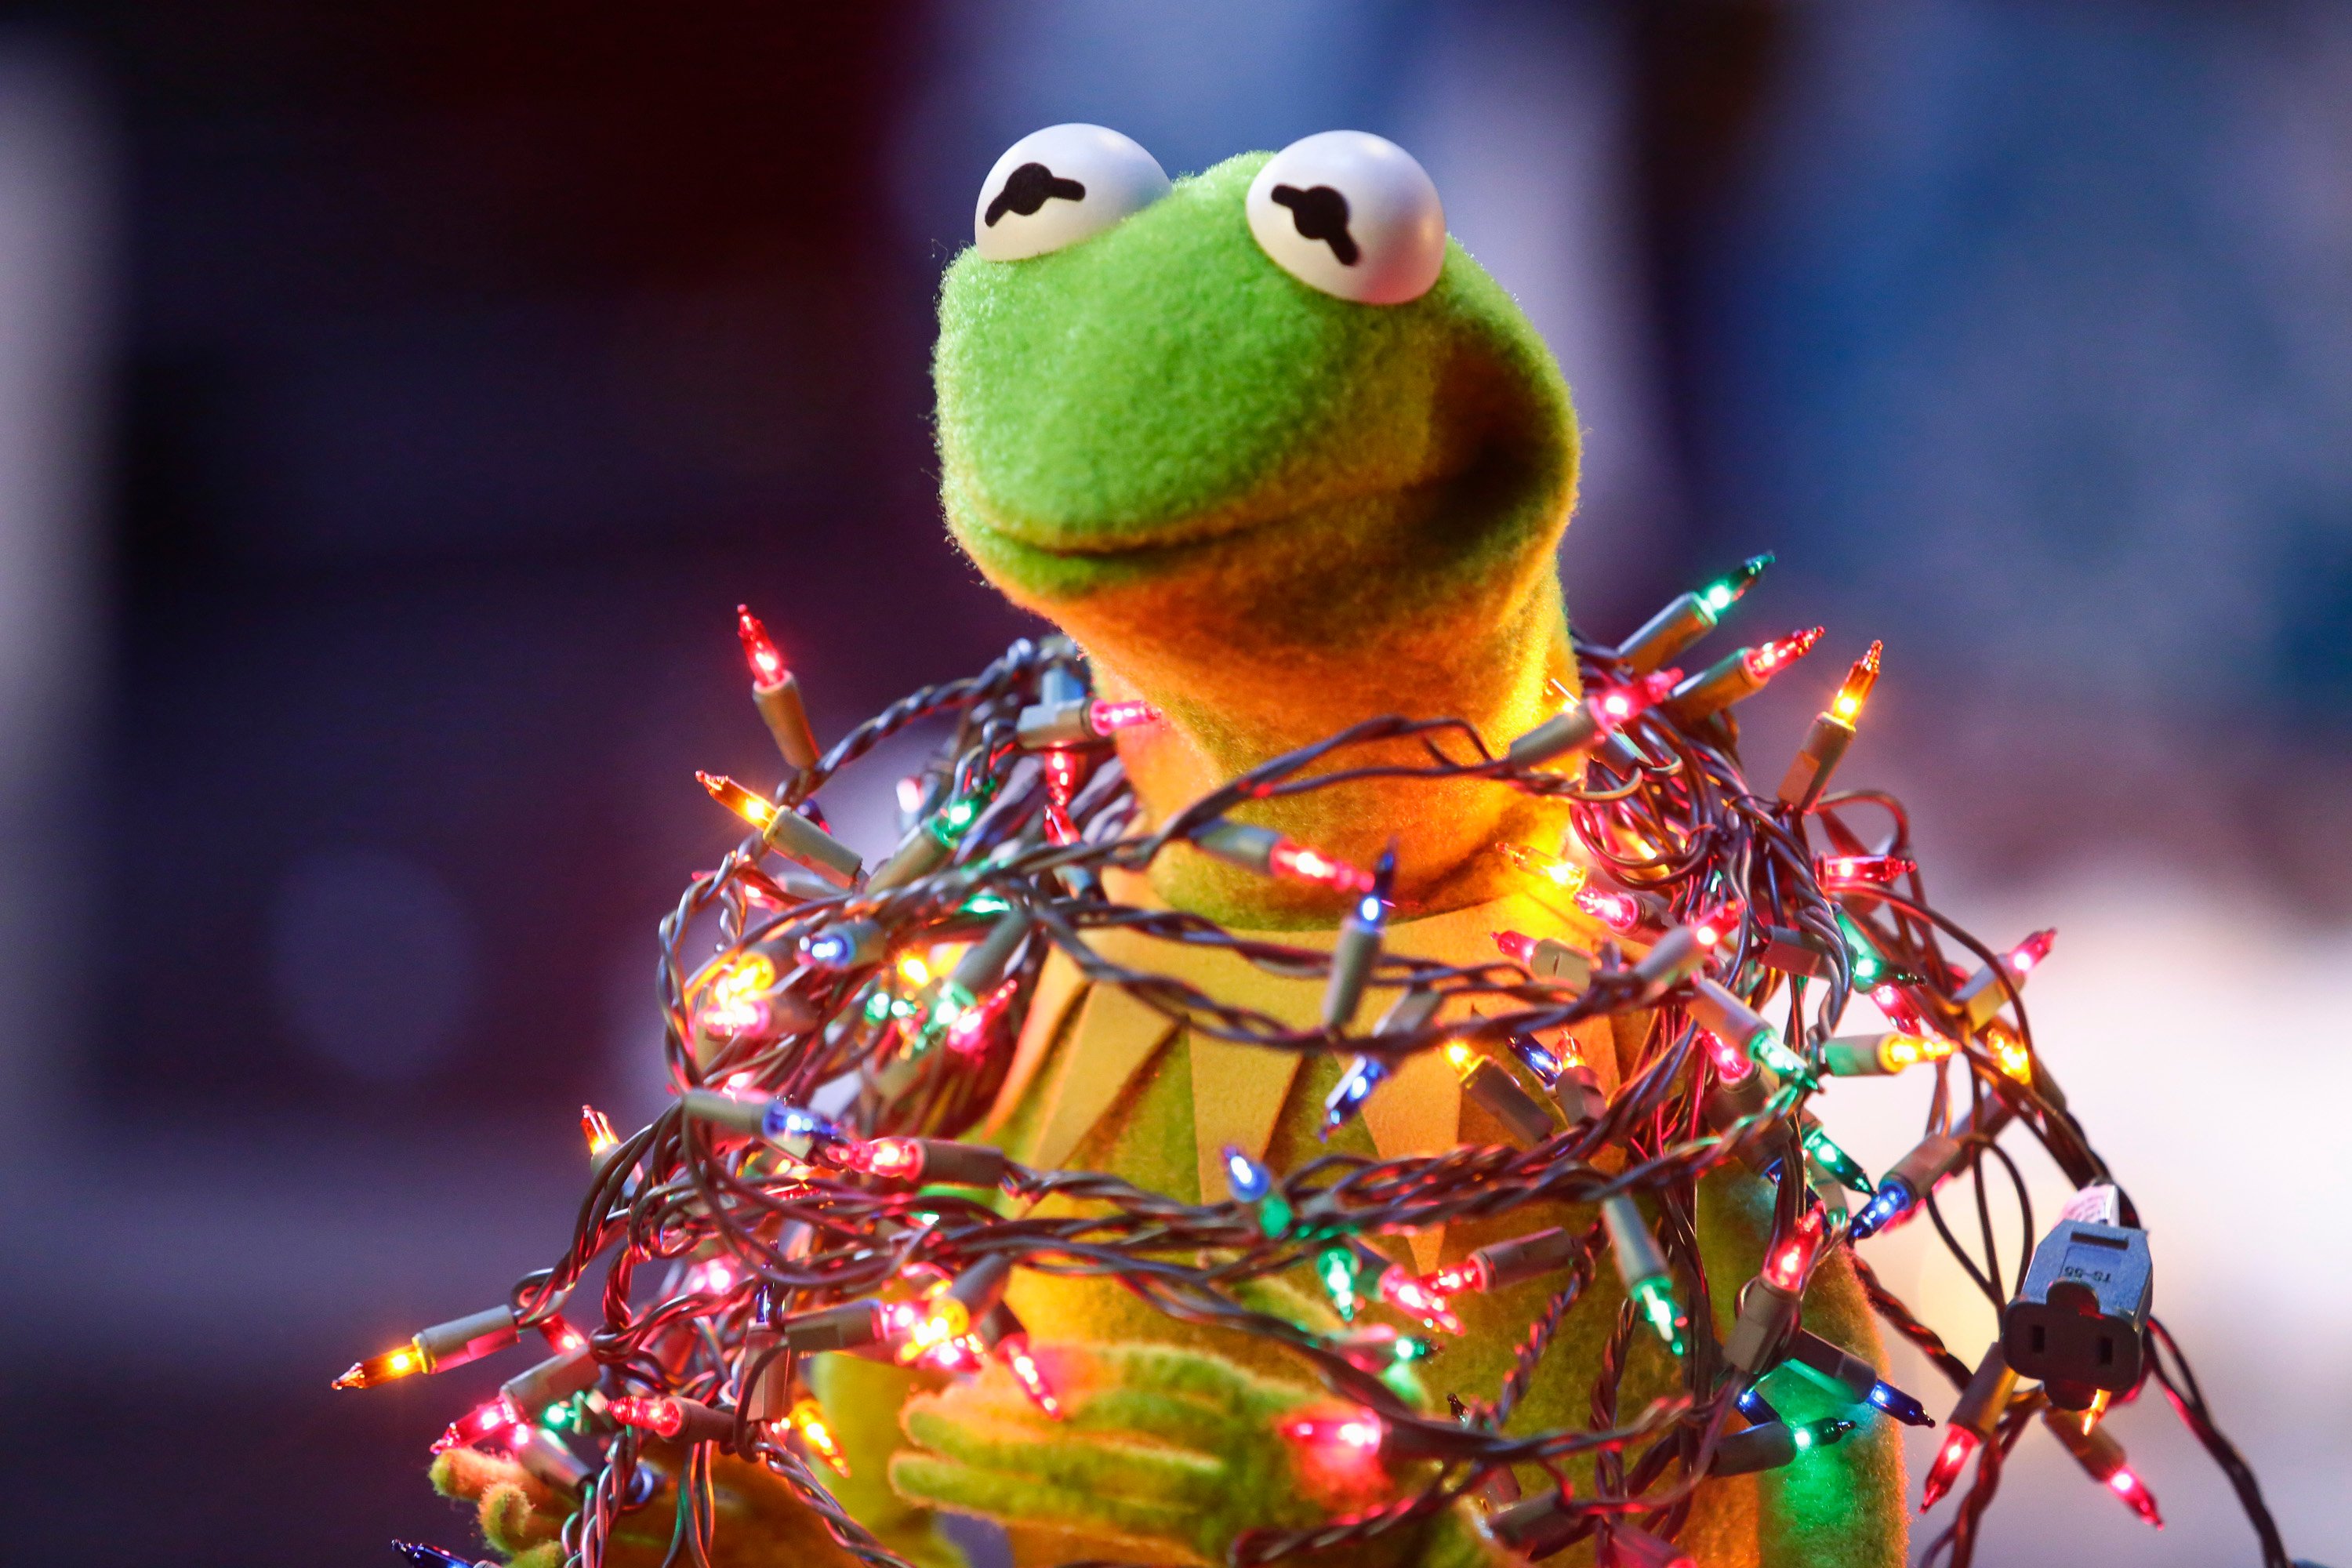 out in the city lights (wendy) The-Muppets-Christmas